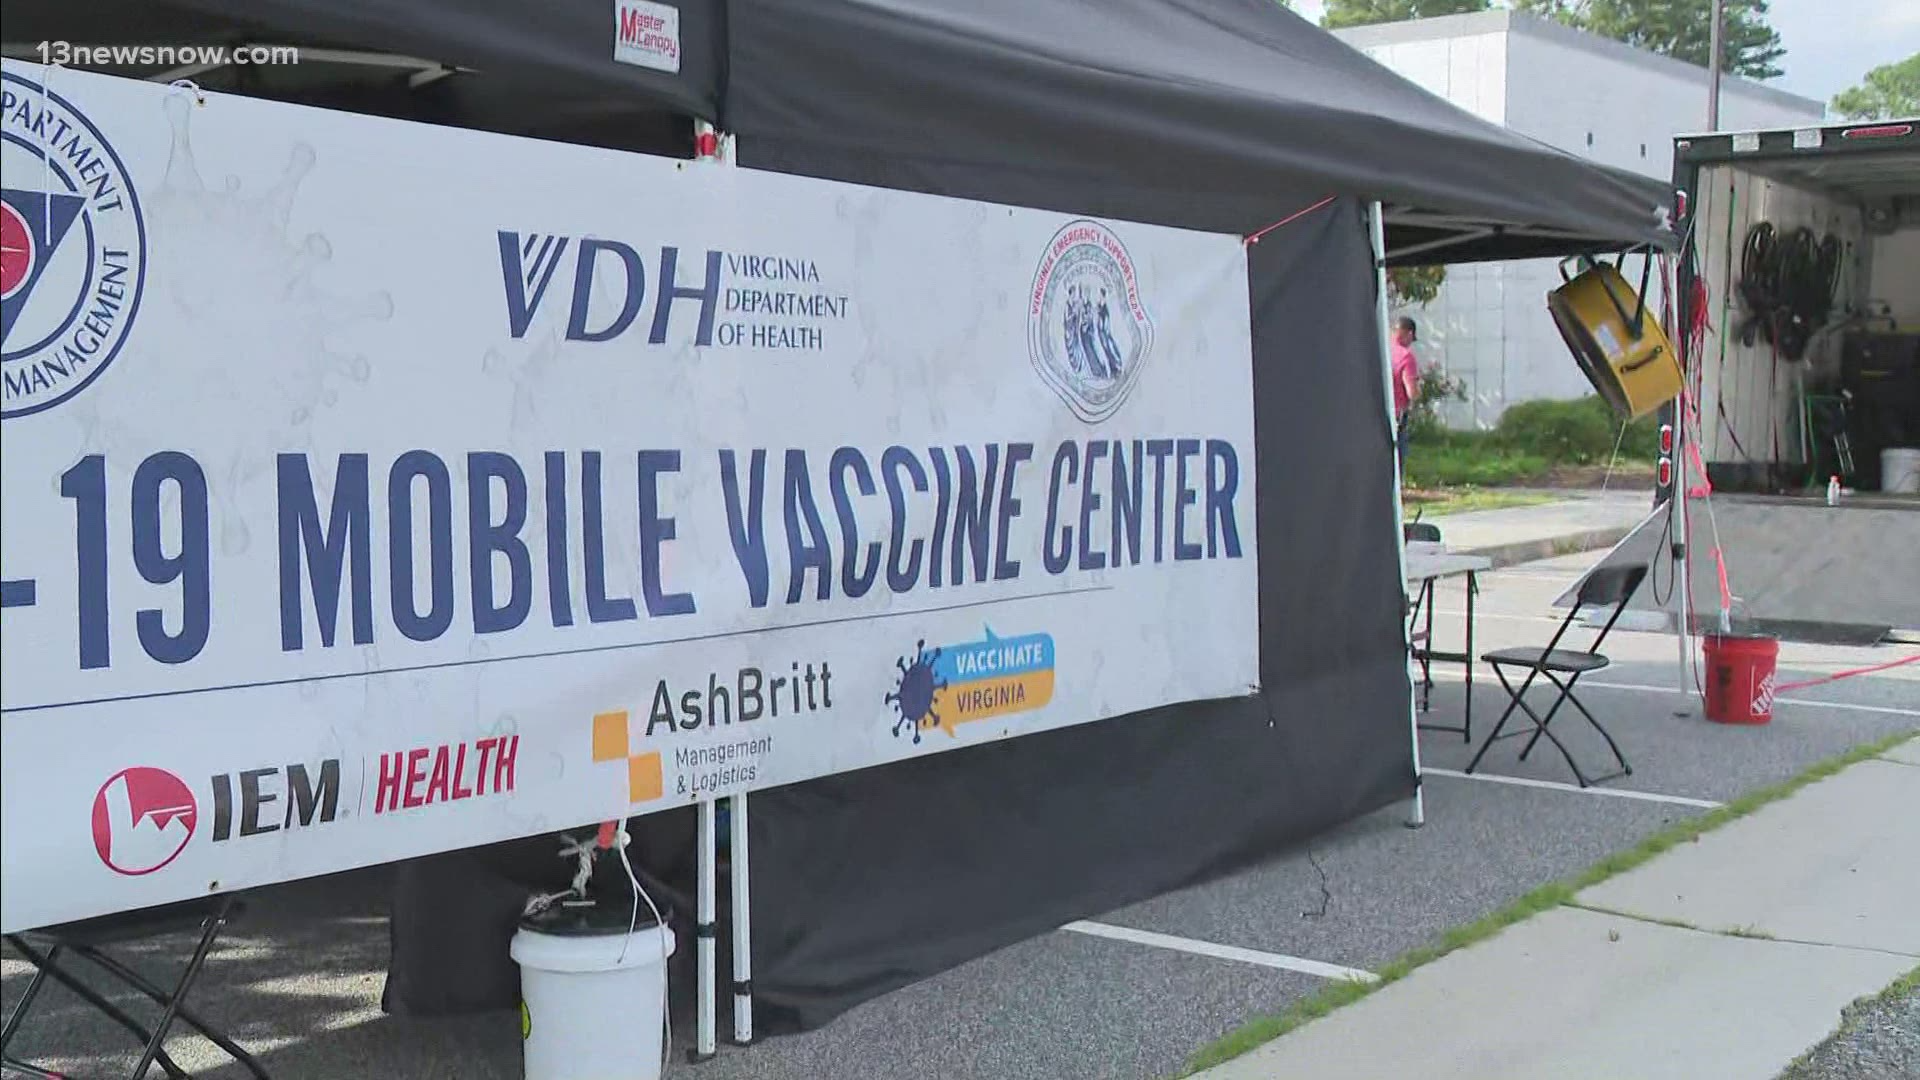 People are making their way to the mobile vaccination clinics across Hampton Roads as the vaccination rate goes down.